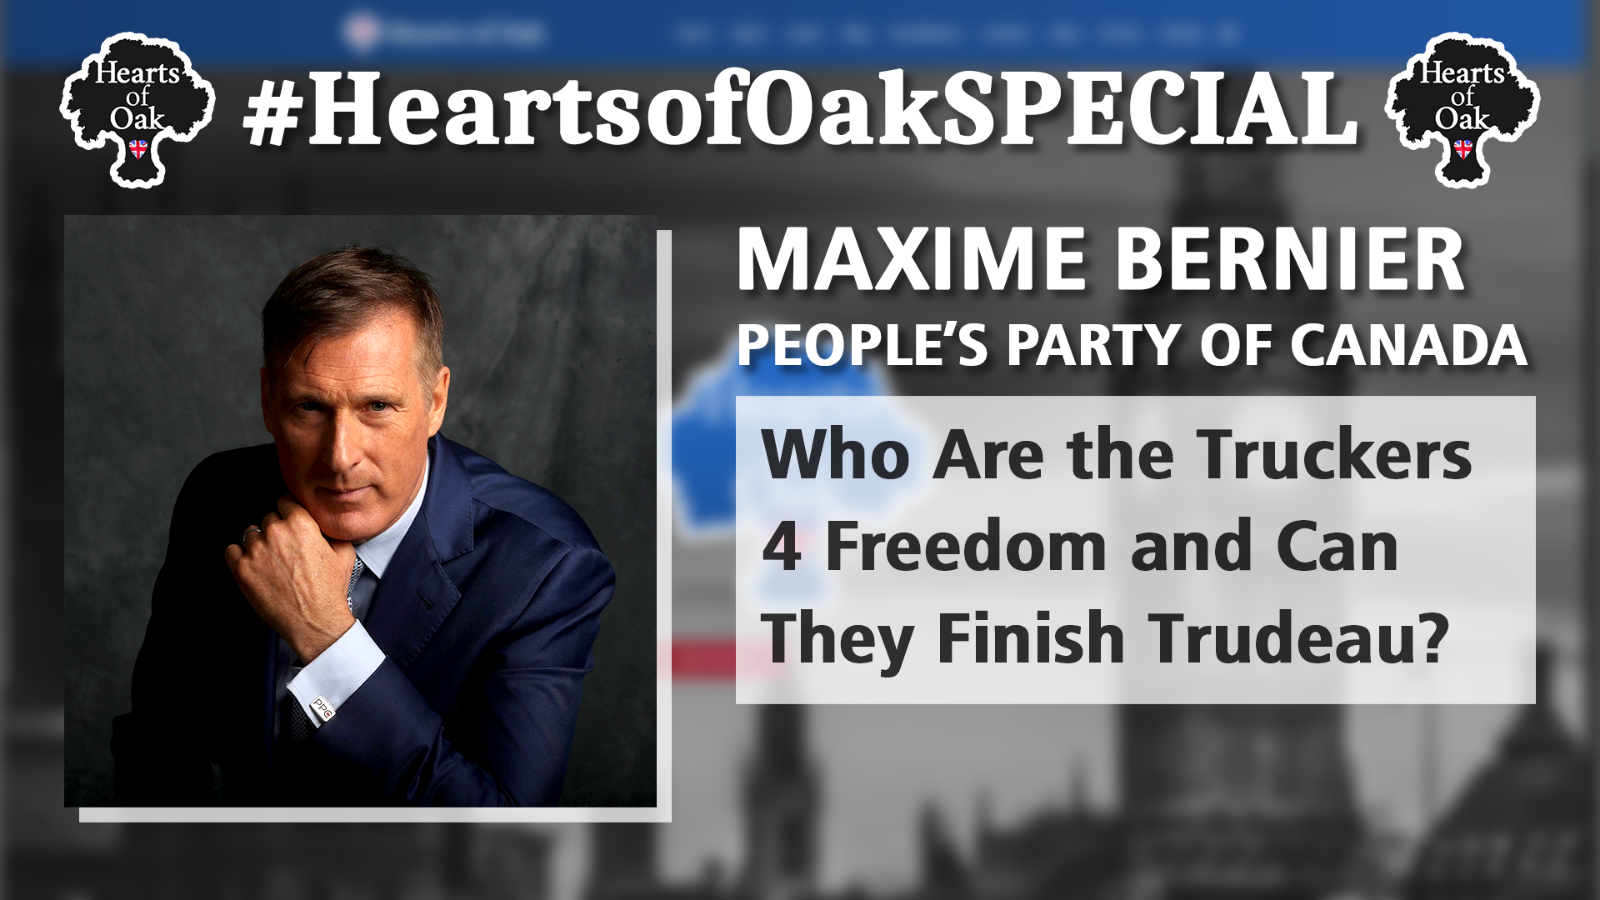 Maxime Bernier: Peoples Party of Canada - Who Are the Truckers4Freedom and Can They Finish Trudeau?